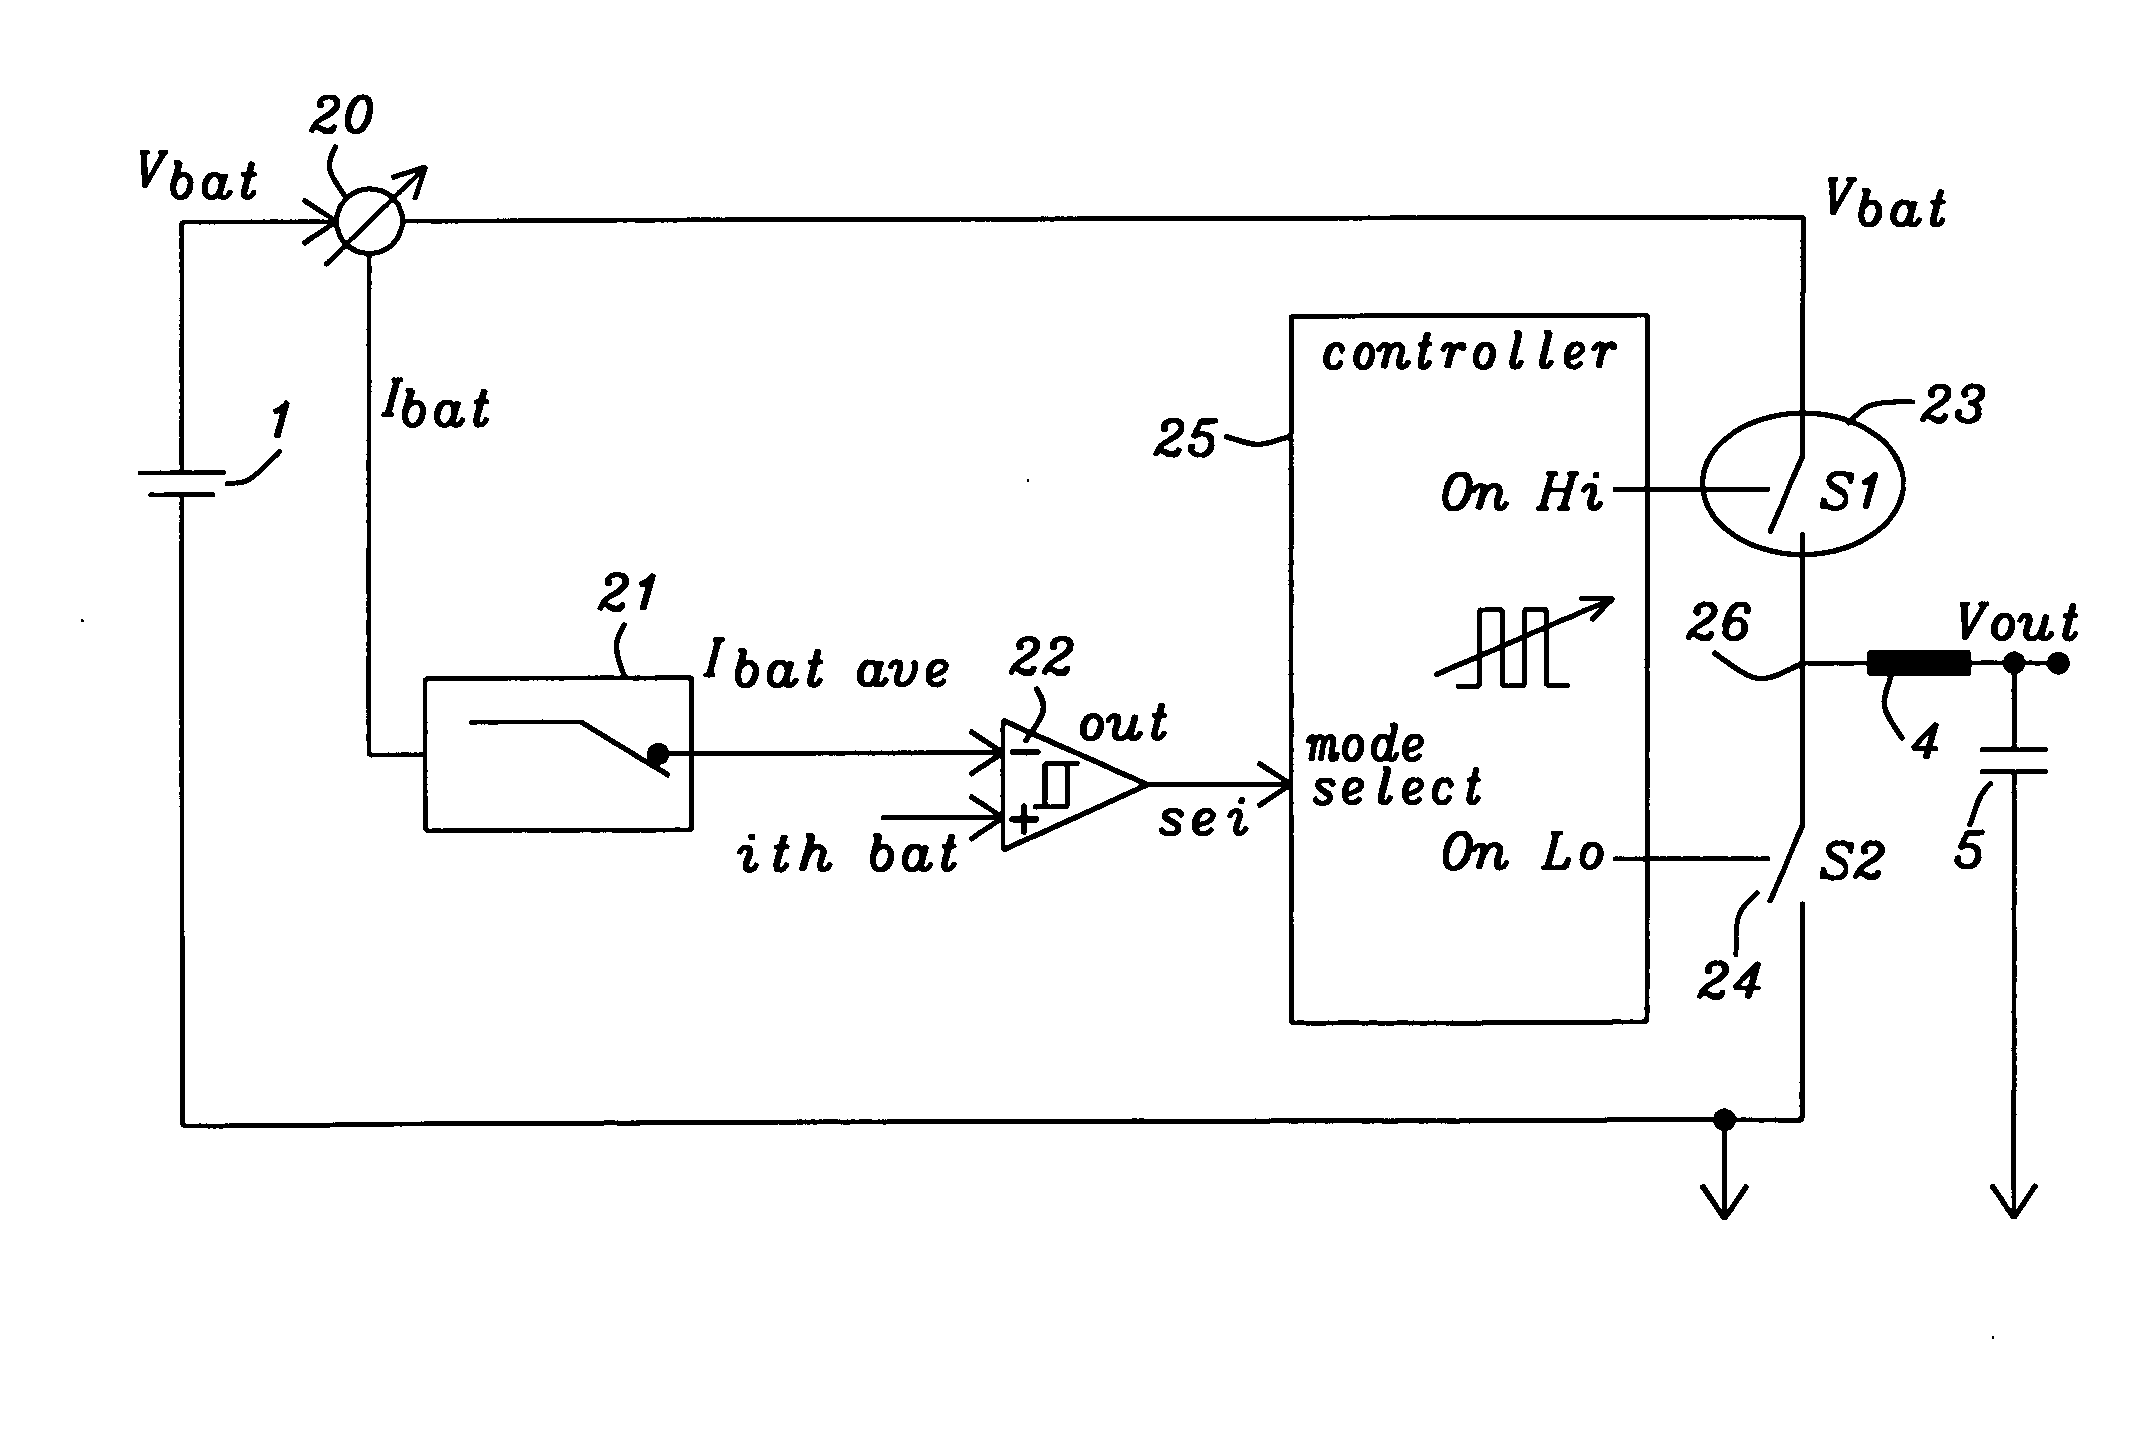 Buck converter threshold detection for automatic pulse skipping mode